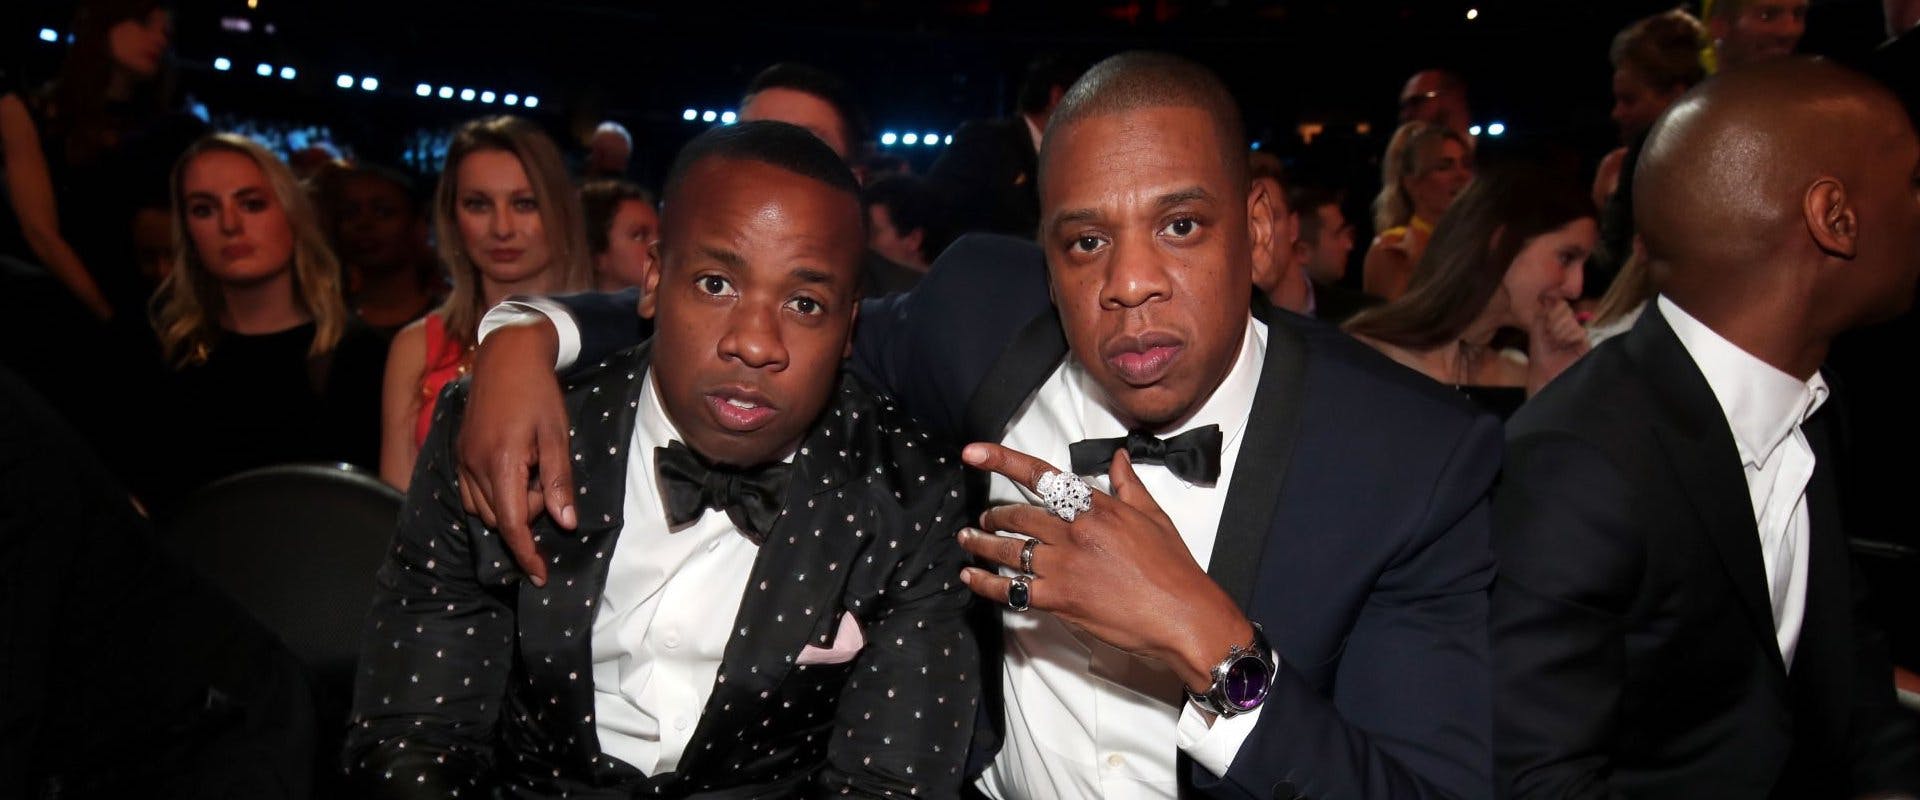 Hip Hop Artists Yo Gotti and Jay-Z during The 59th GRAMMY Awards at STAPLES Center on February 12, 2017 in Los Angeles, California. 